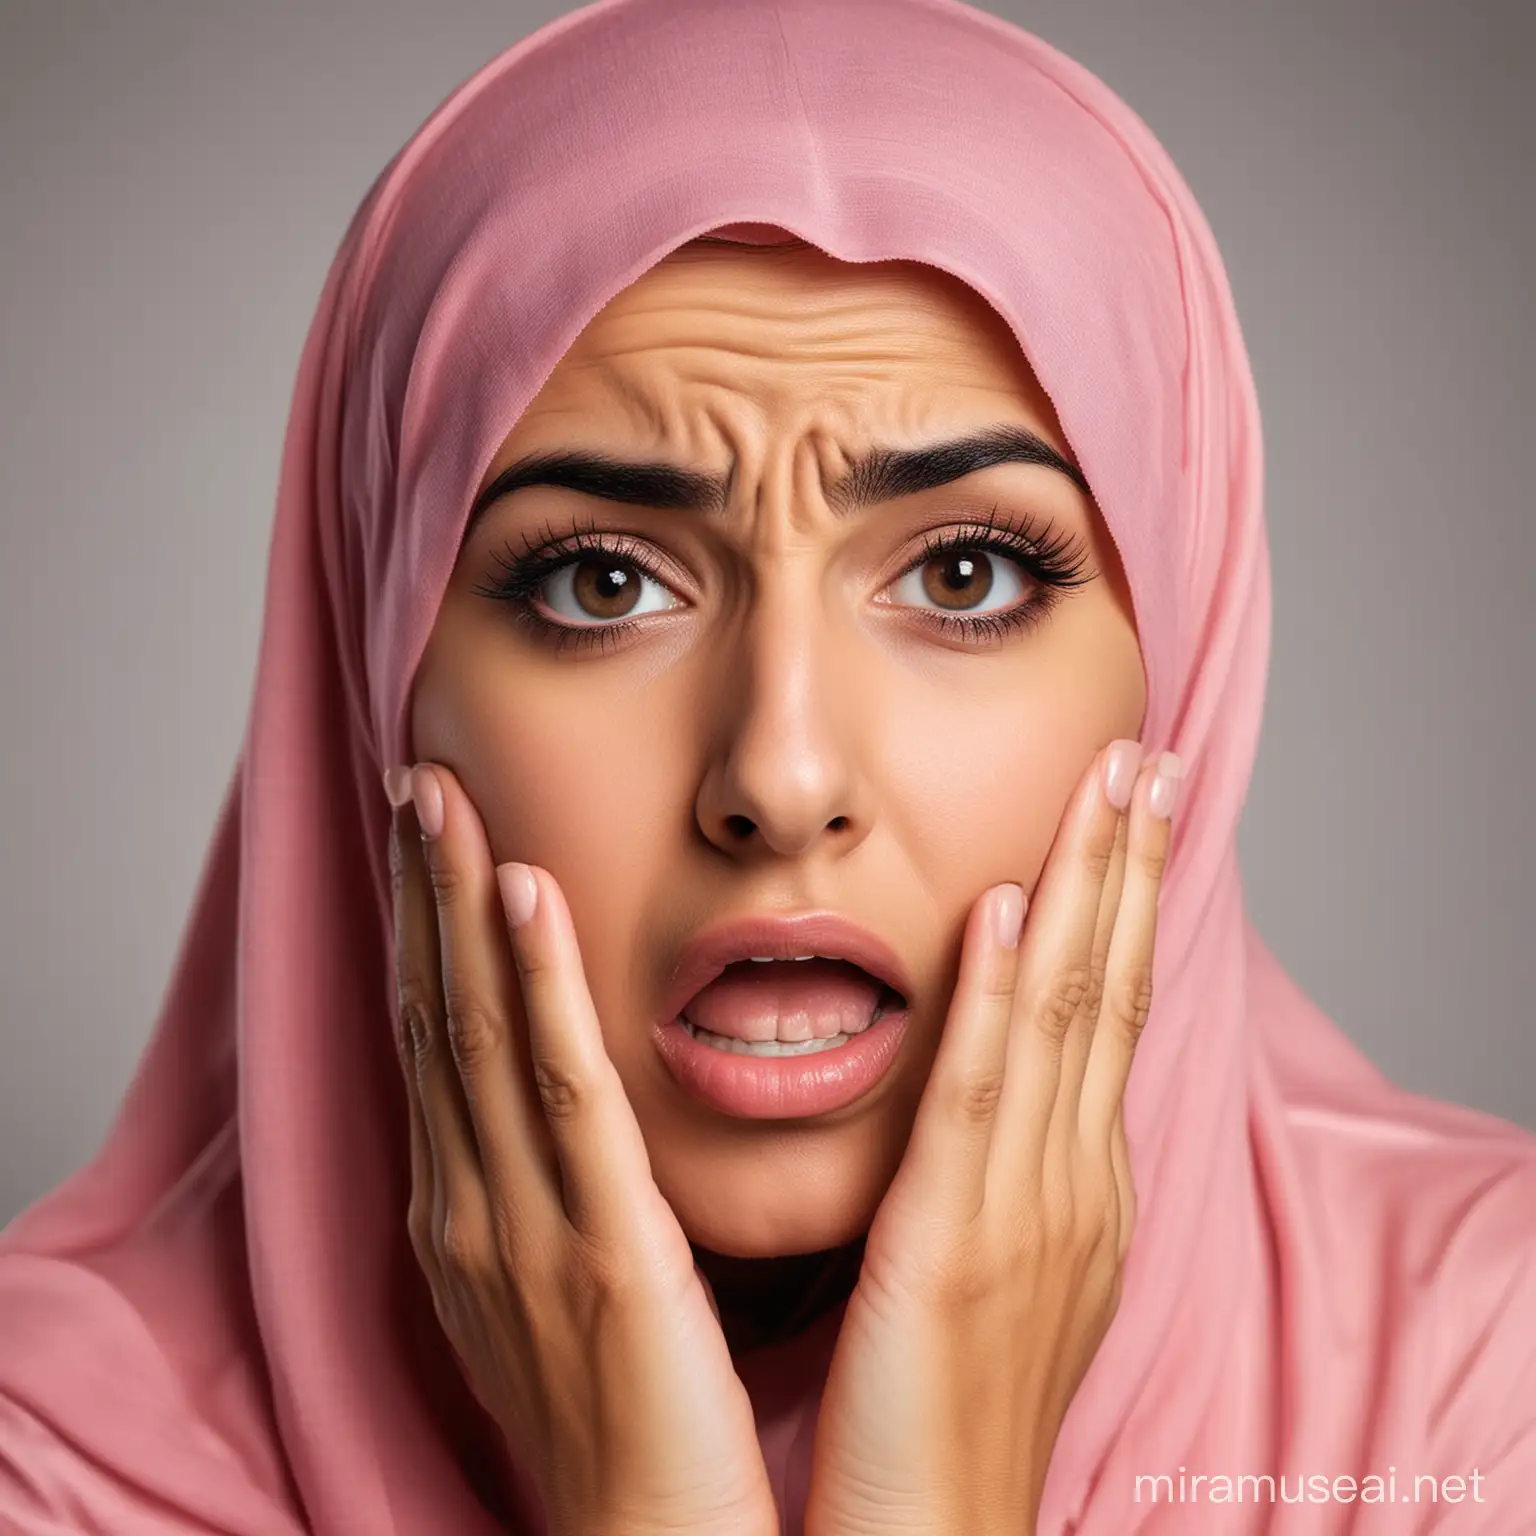 Surprised Arab Woman Holding Her Cheeks in Amazement